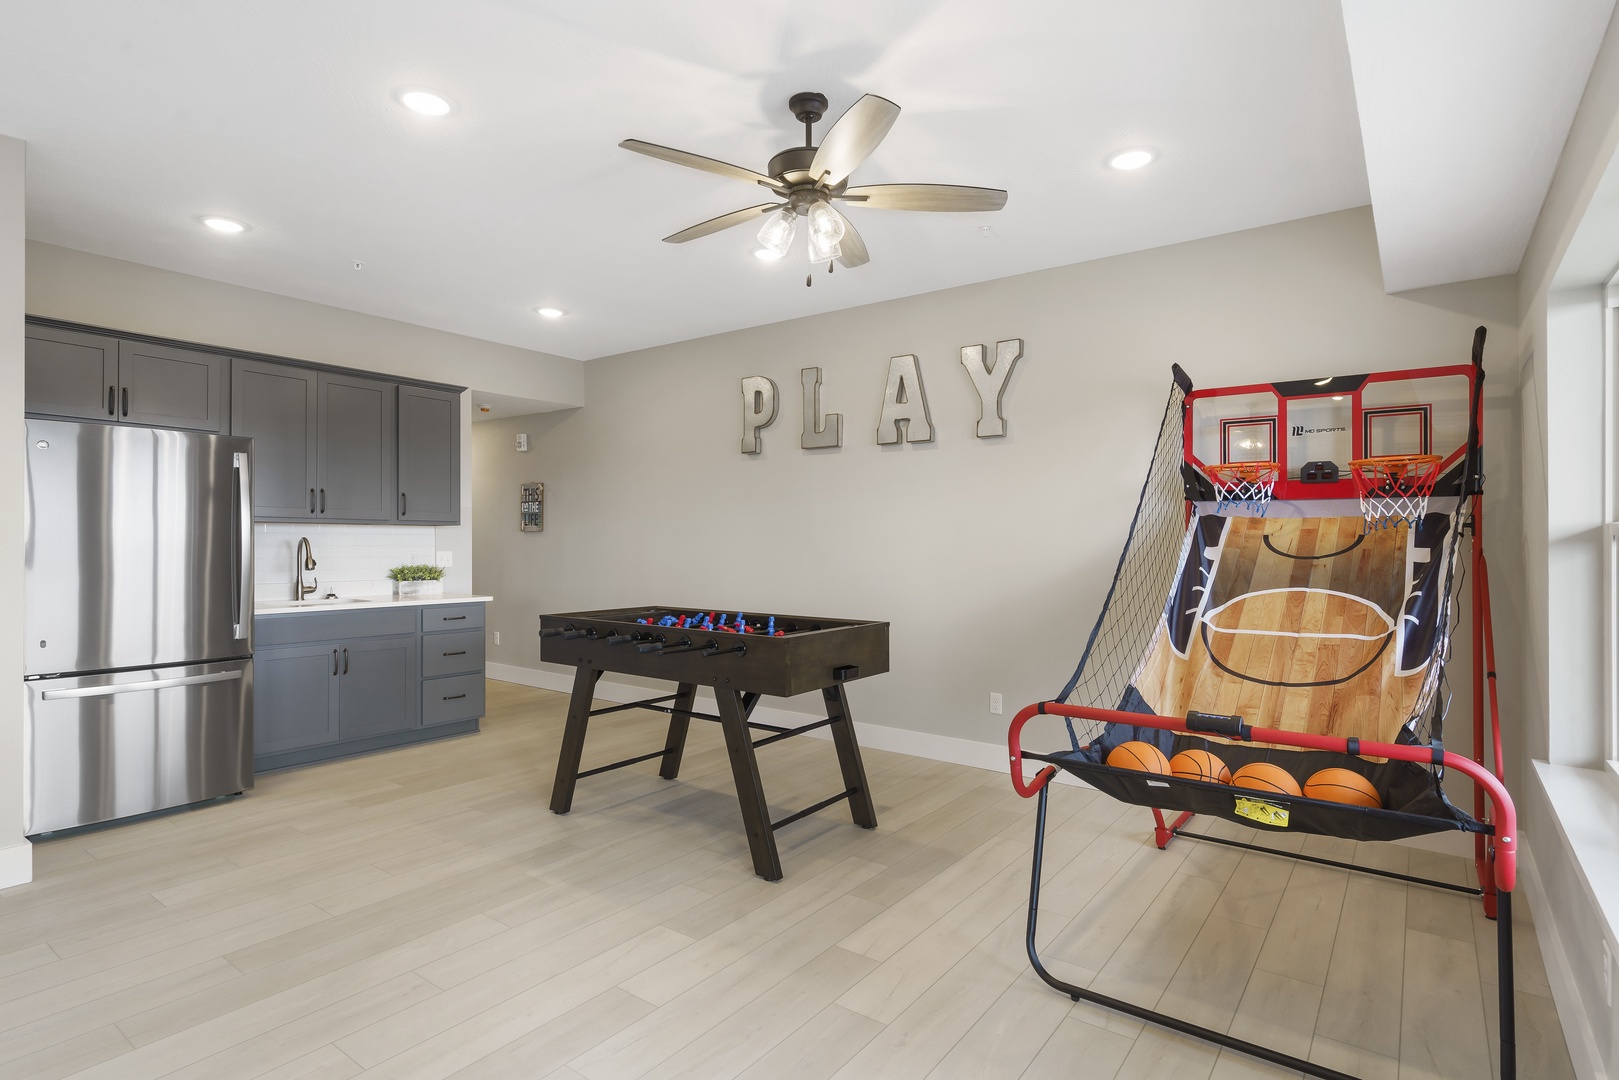 Downstairs living area/game room with kitchenette